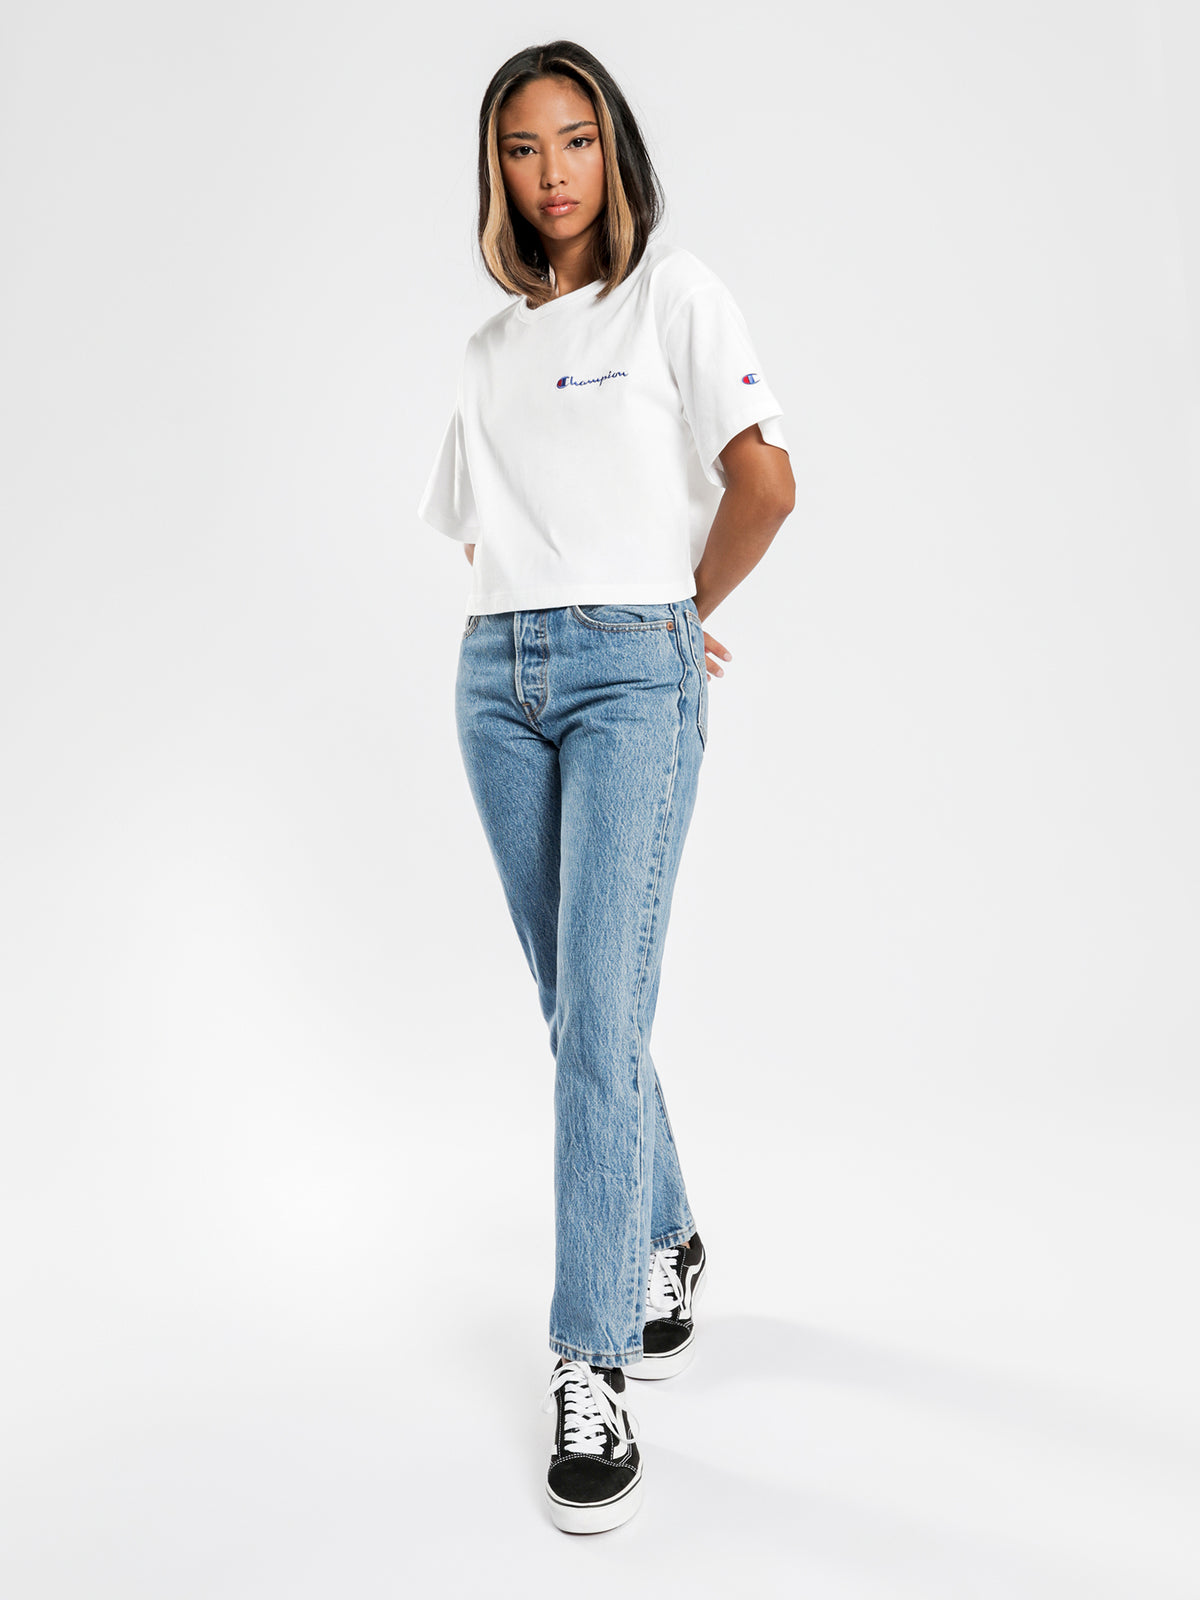 Heritage Cropped Mini Script Short Sleeve T-Shirt in White